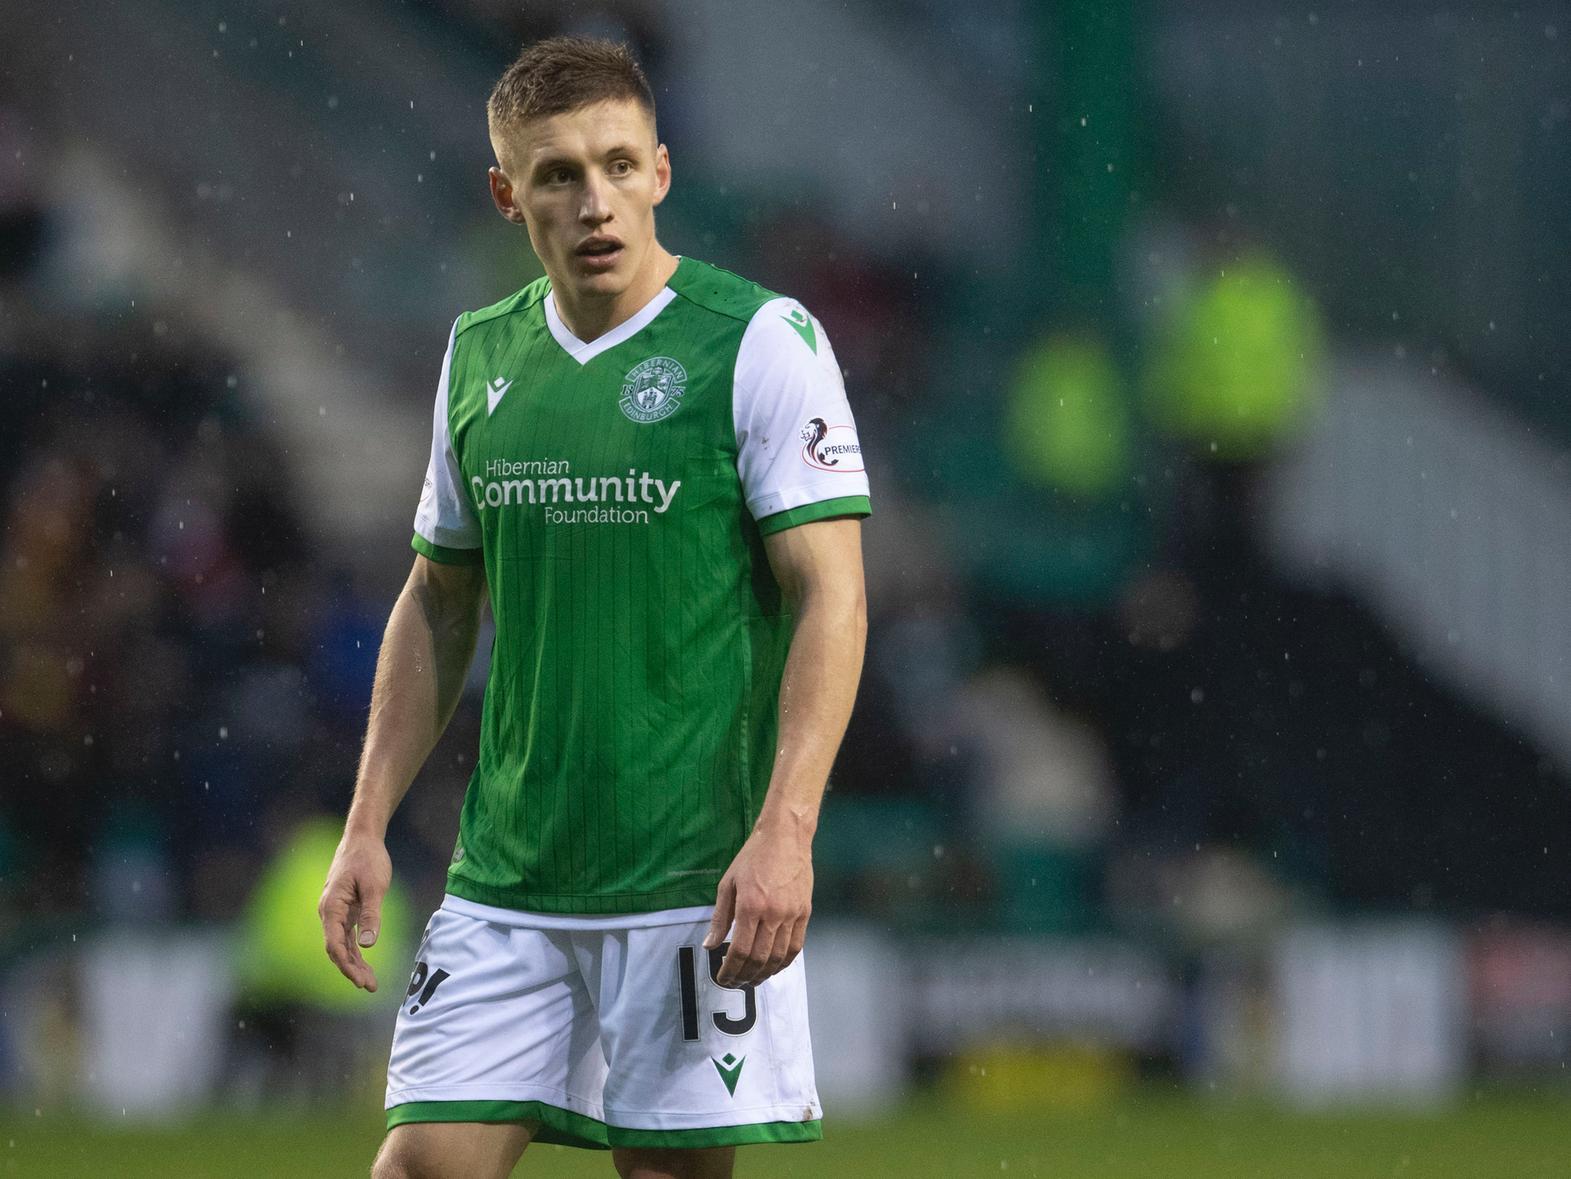 The on-loan midfielder has slotted in well to this Hibs side and looks a gem of an acquisition.